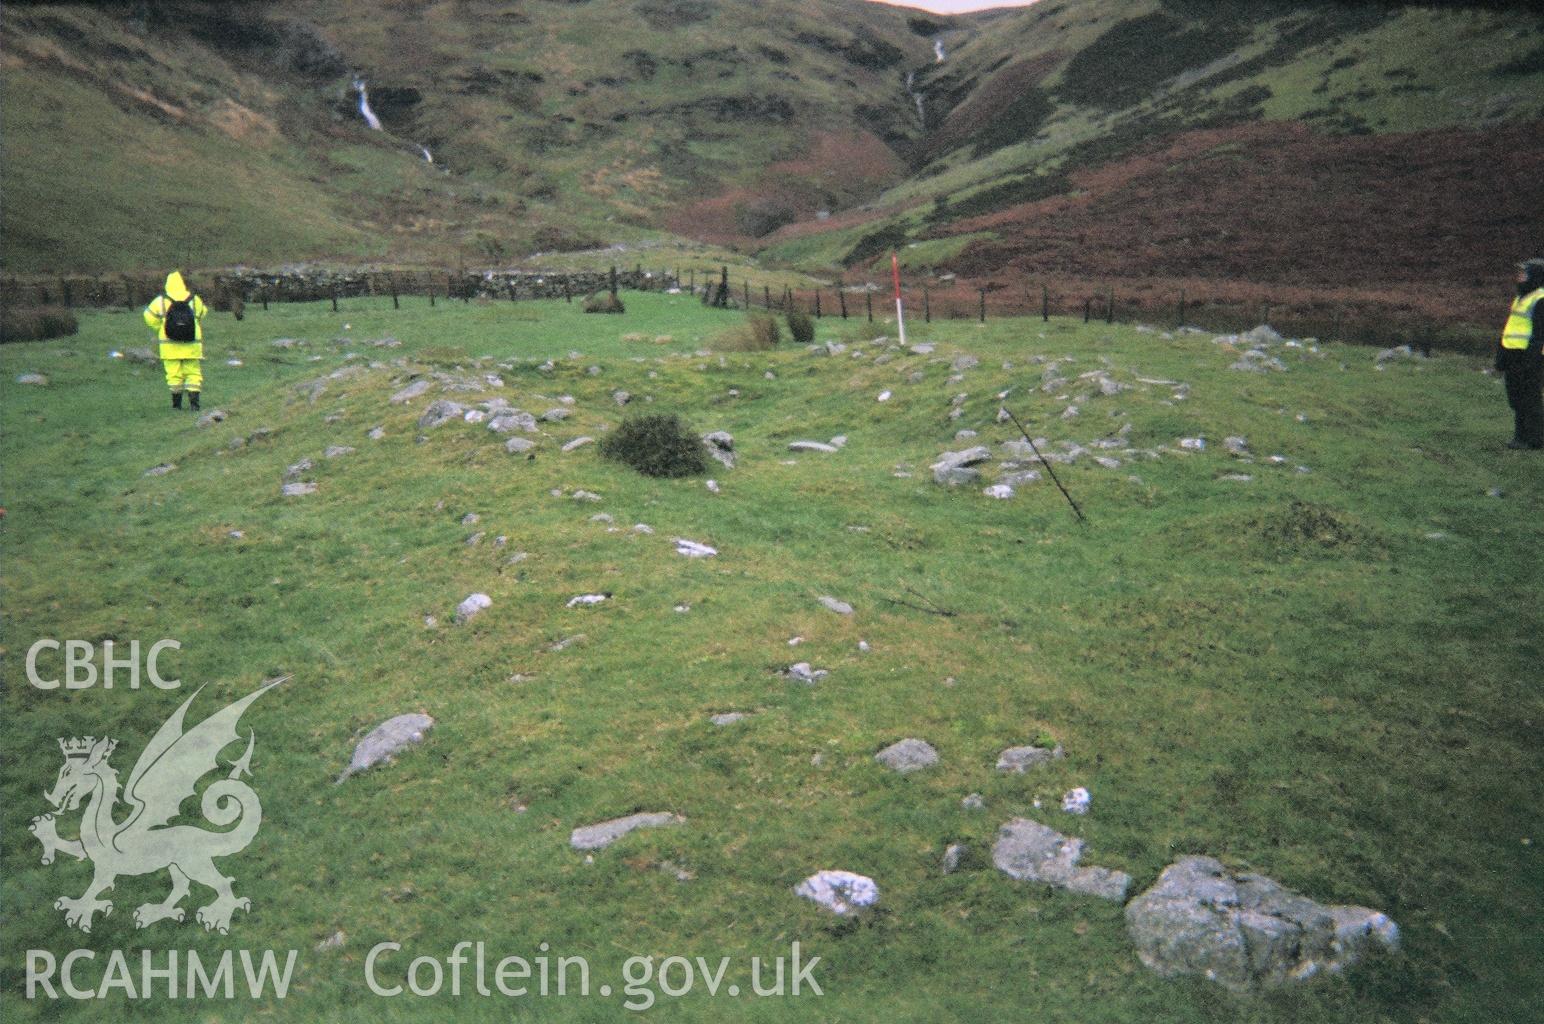 Digital colour photograph of Nant y Llyn building platform II taken on 06/12/2006 by B. Britton during the Berwyn North East Upland Survey by Archaeophysica.